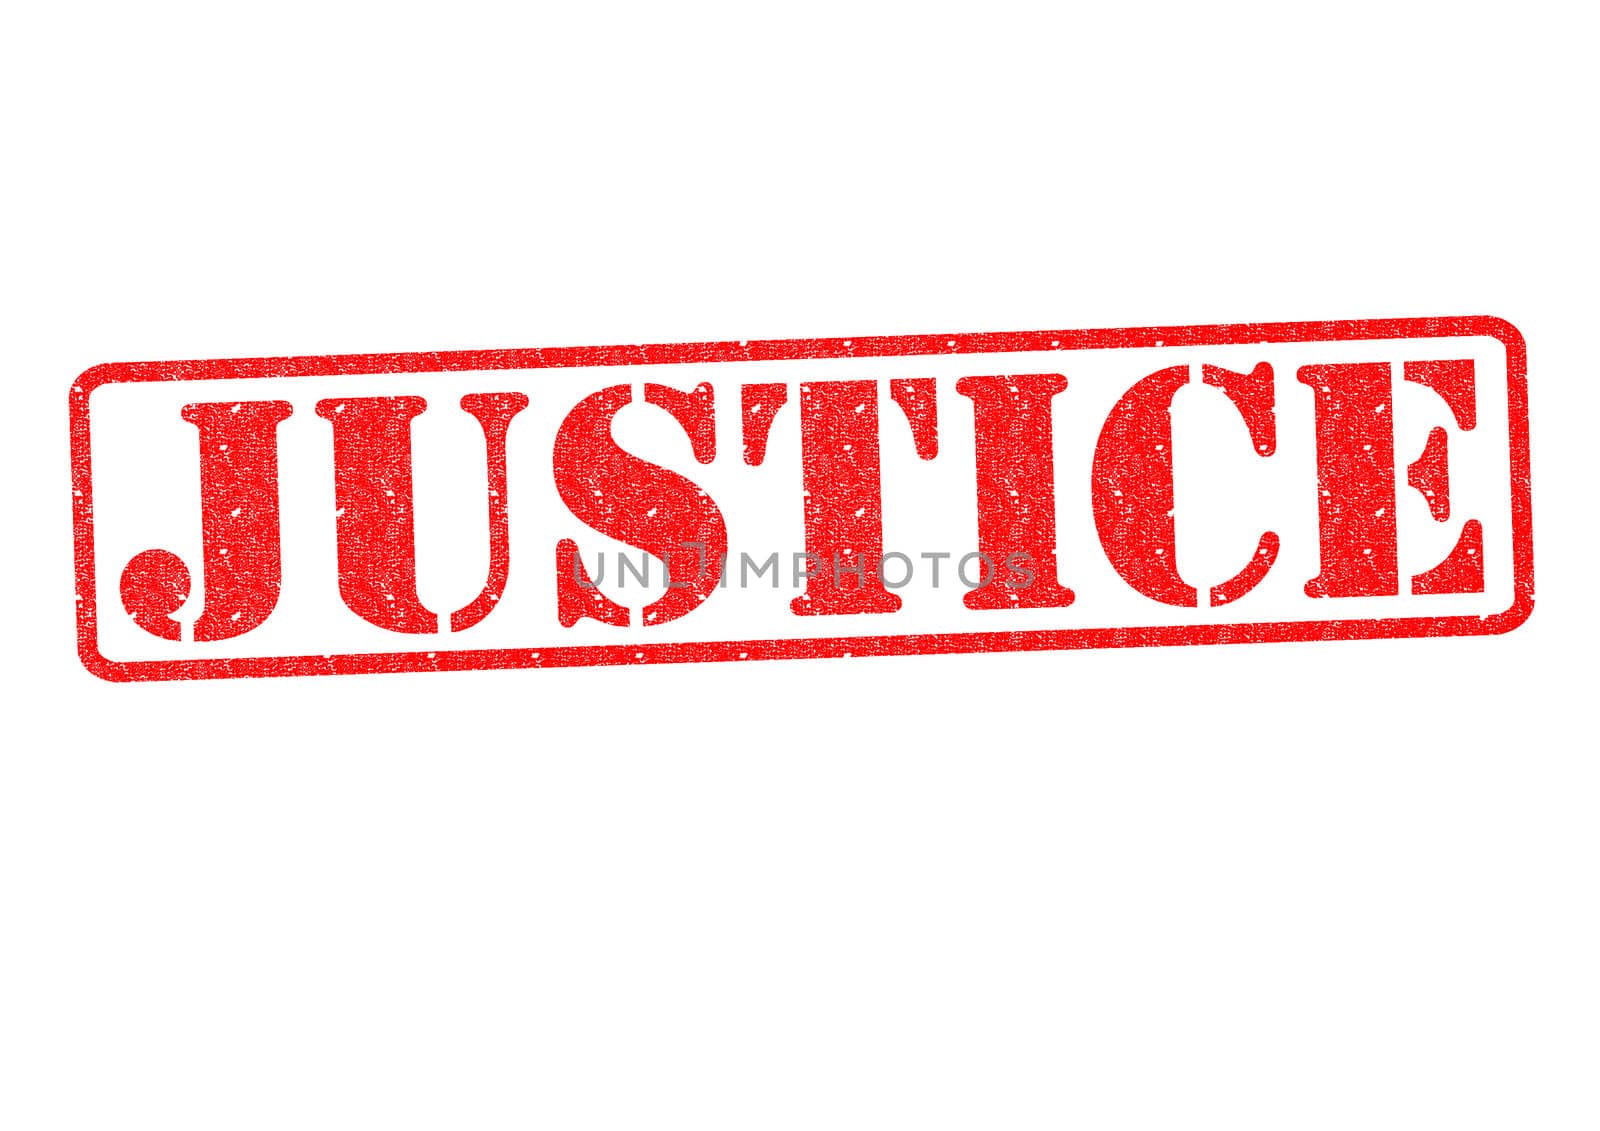 JUSTICE Rubber Stamp over a white background.